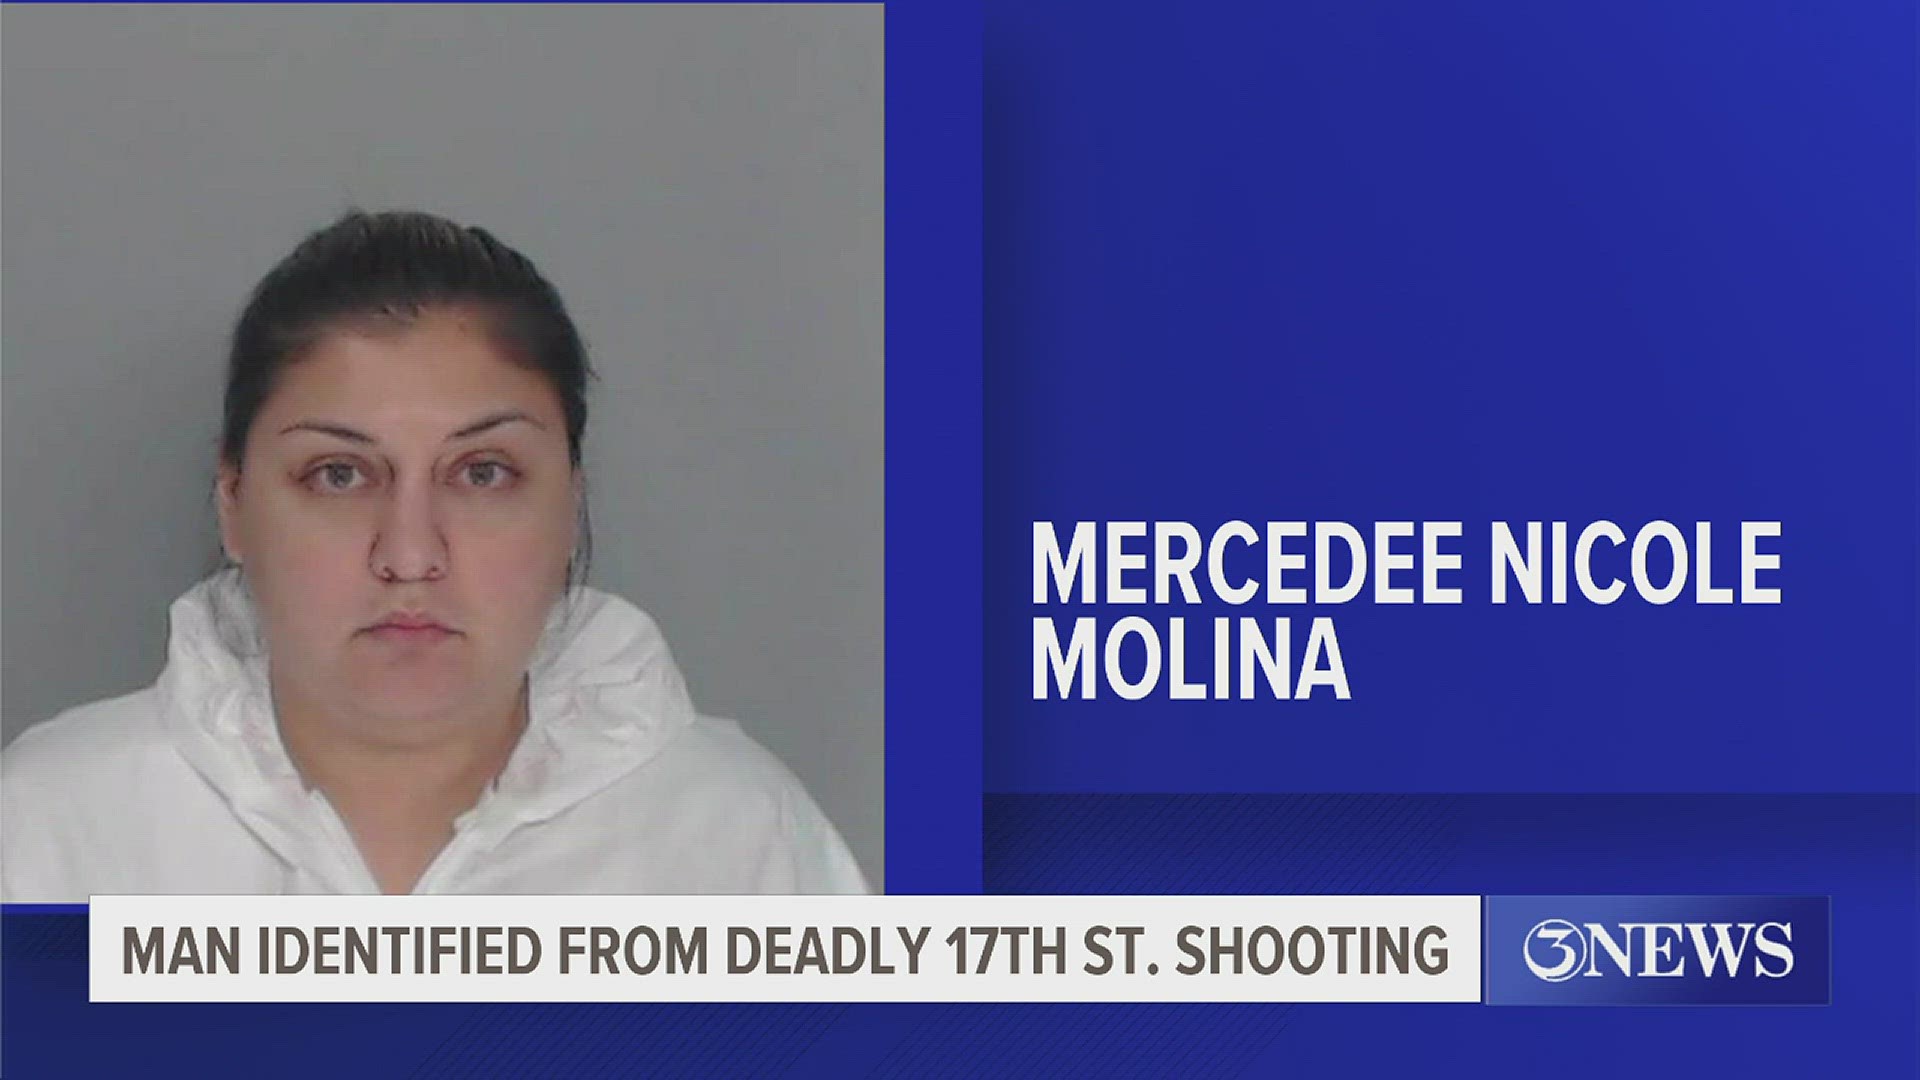 Police arrested and charged 31-year-old Mercedee Nicole Molina, who is accused of killing John David Dominguez.